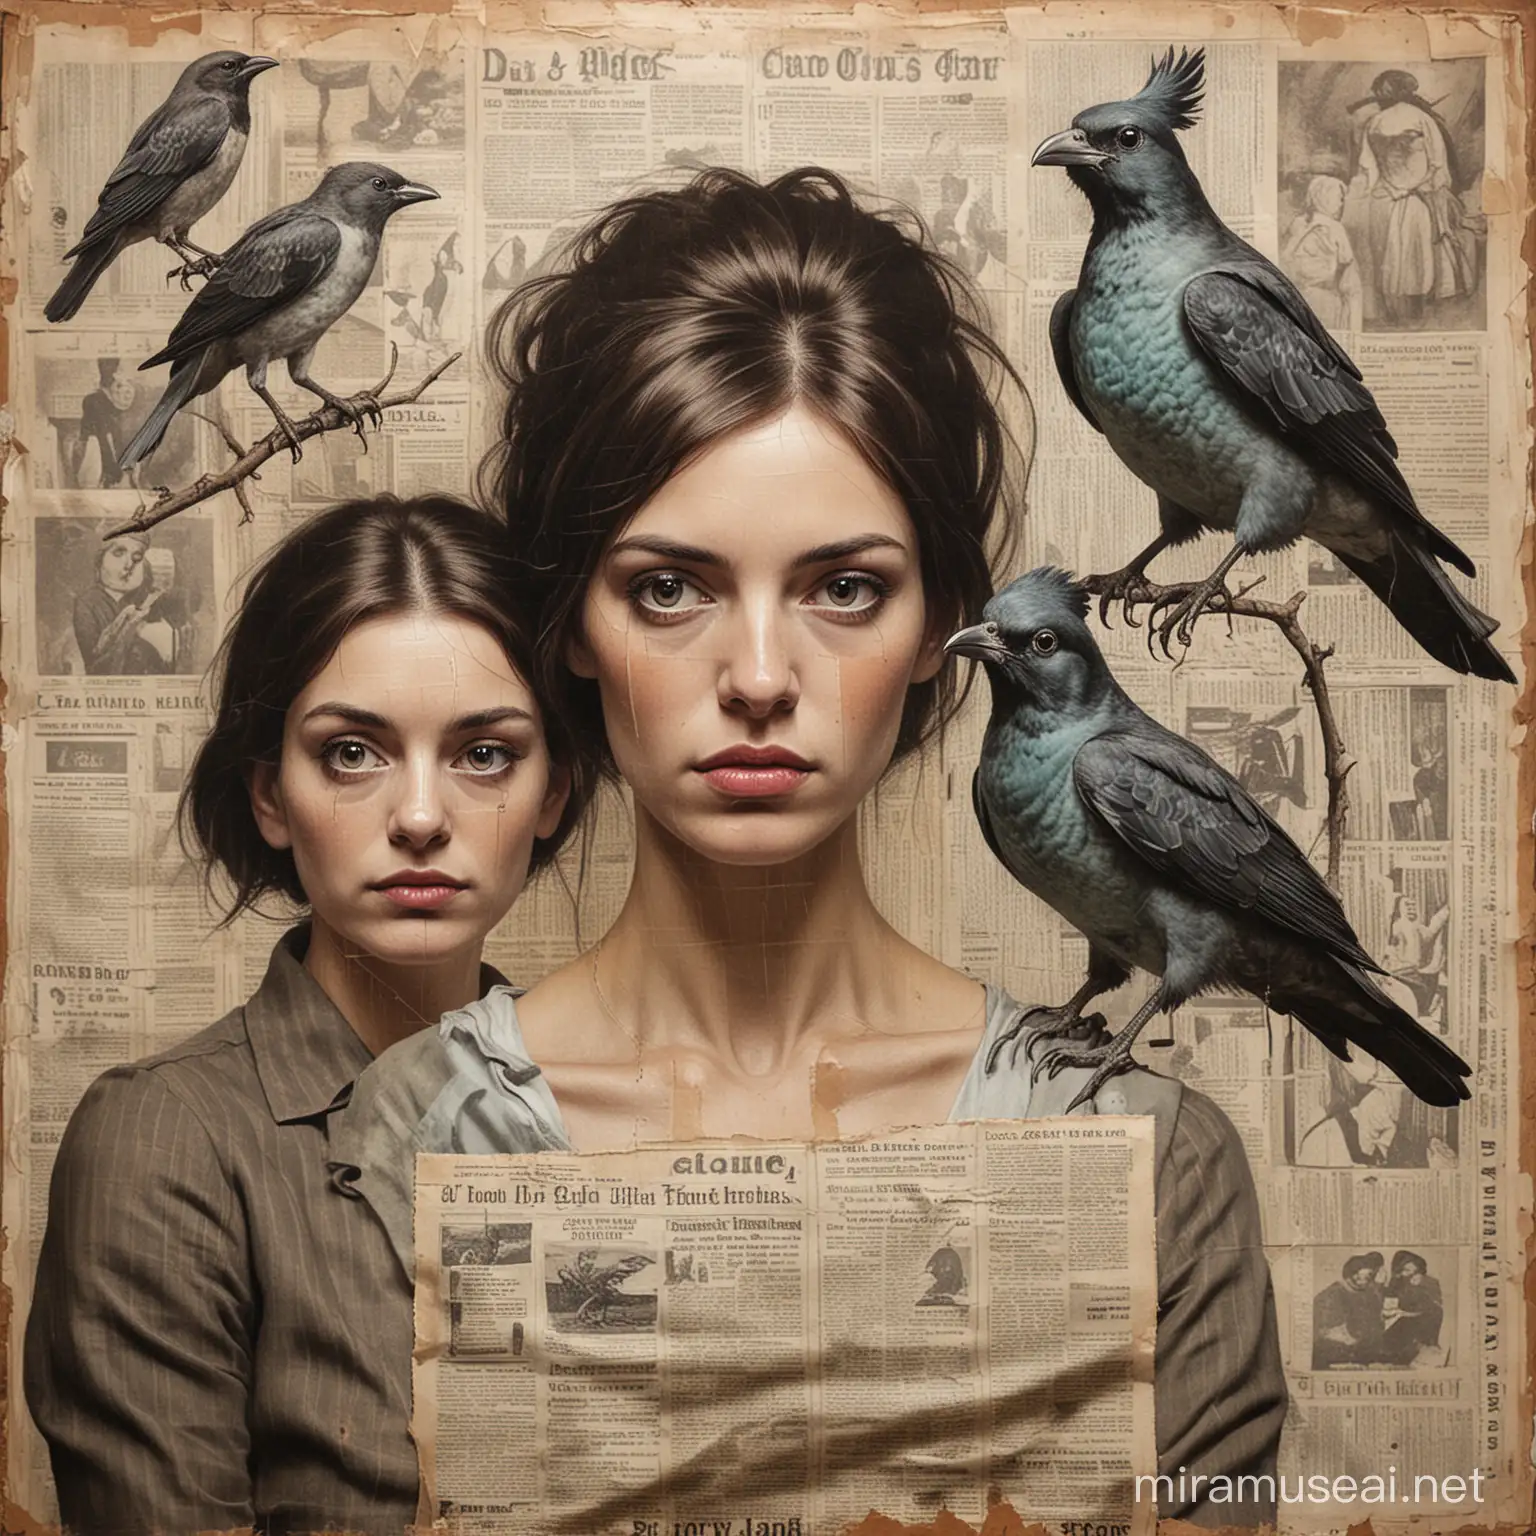 Eerie Mixed Media Painting Women Staring Amidst Disproportionate Bird and Newspaper Background